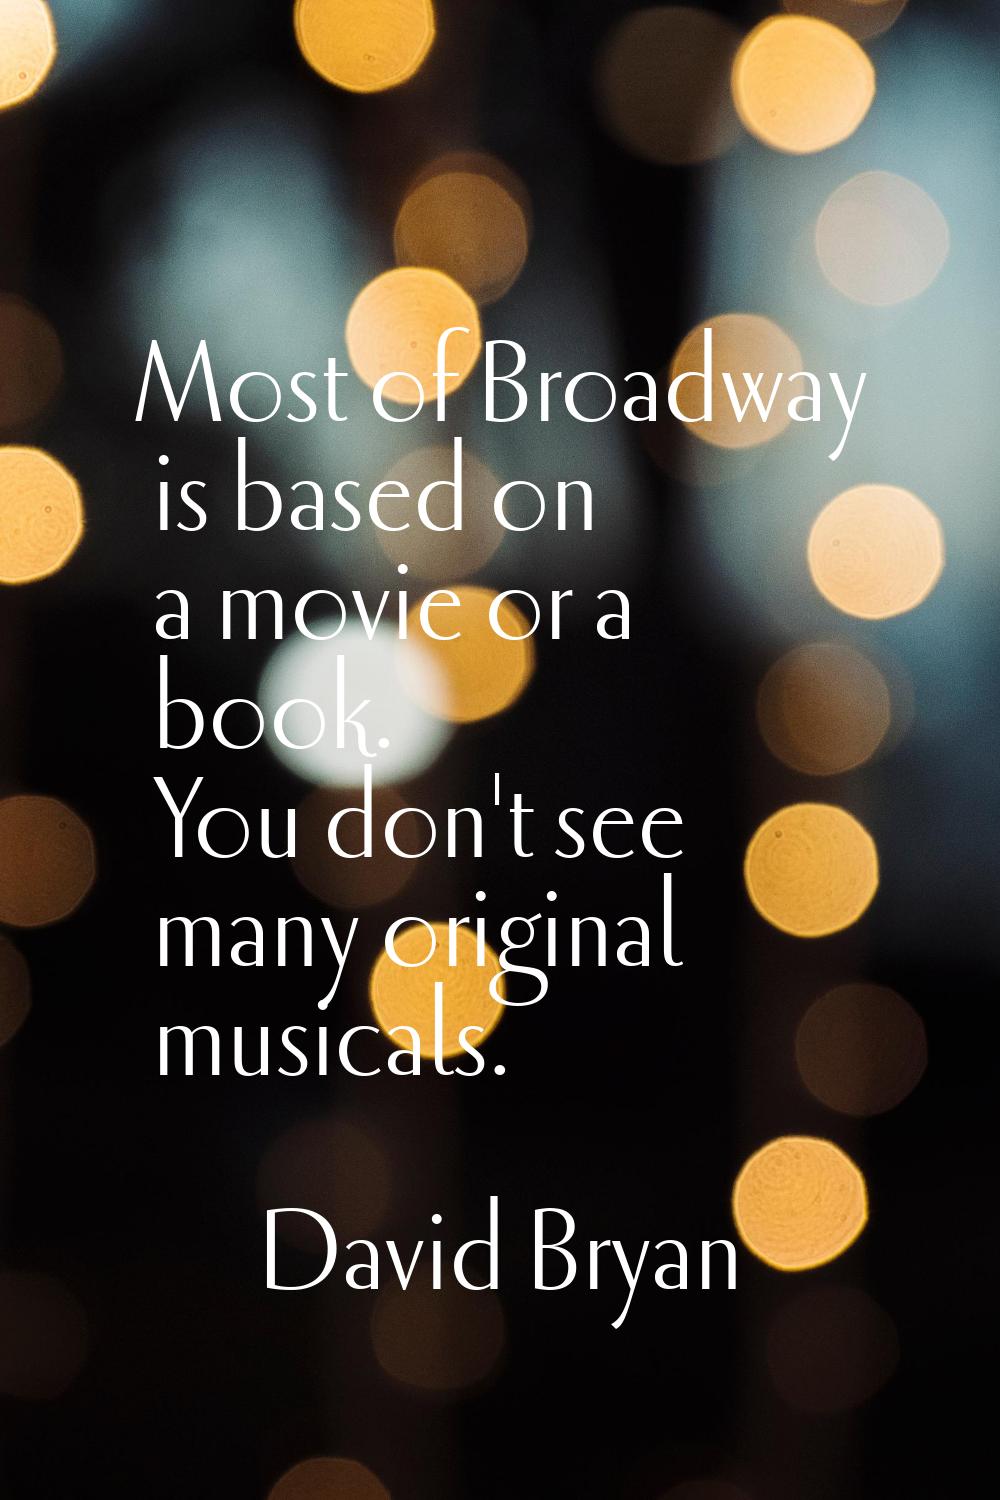 Most of Broadway is based on a movie or a book. You don't see many original musicals.